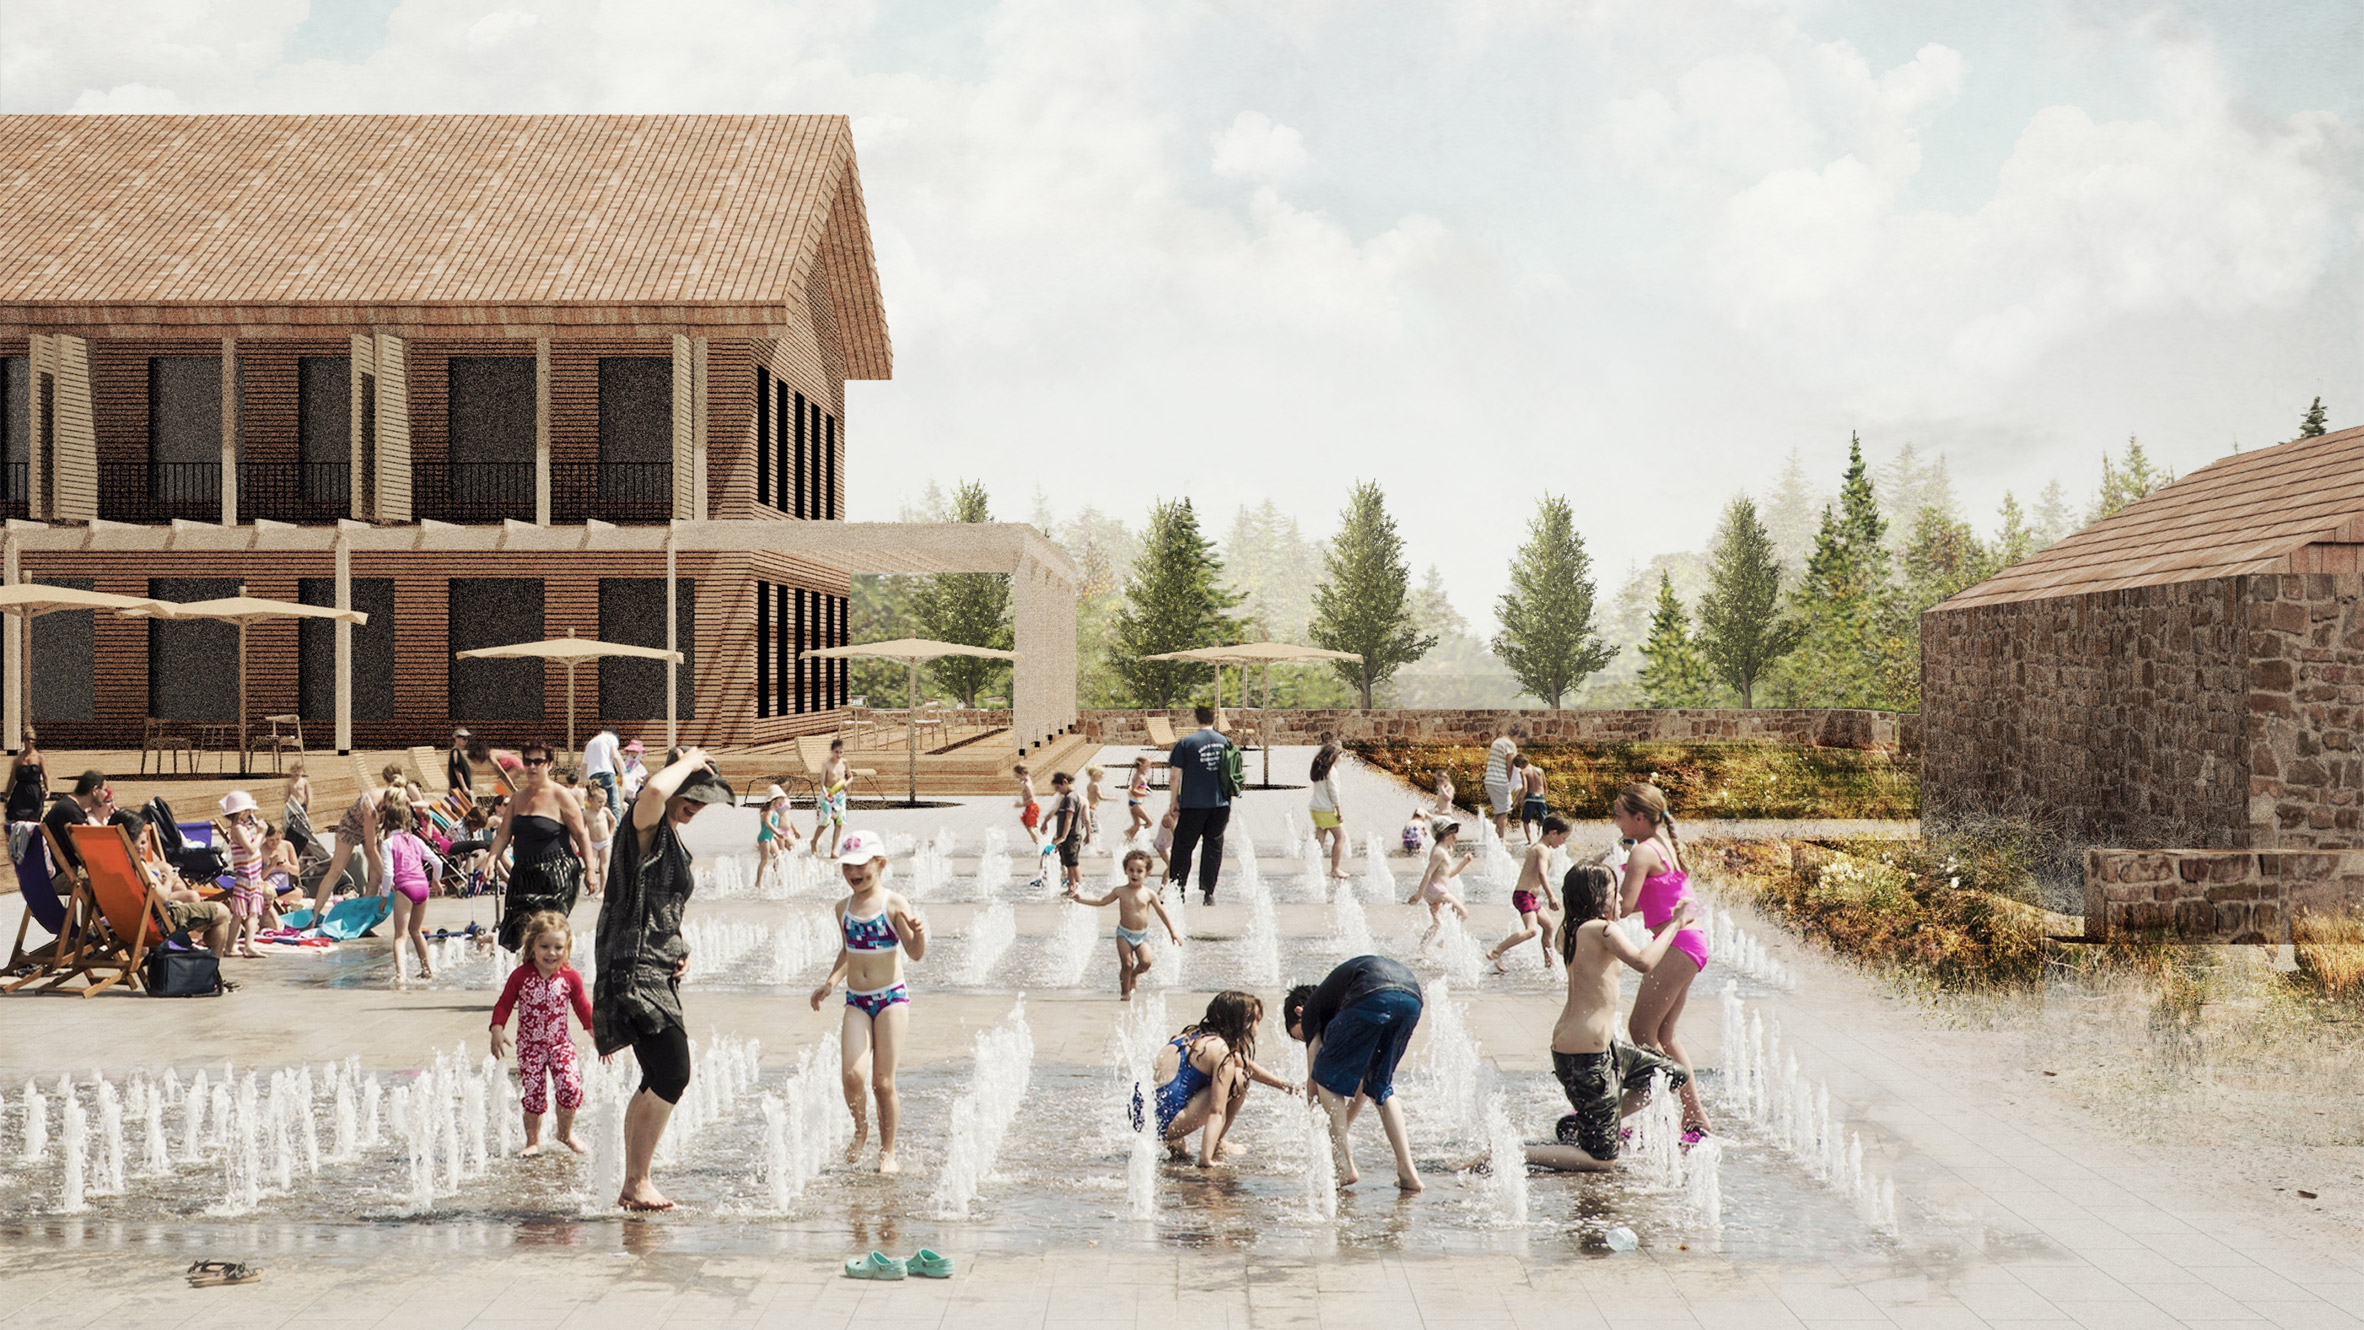 Render of children playing in a courtyard space with water fountains